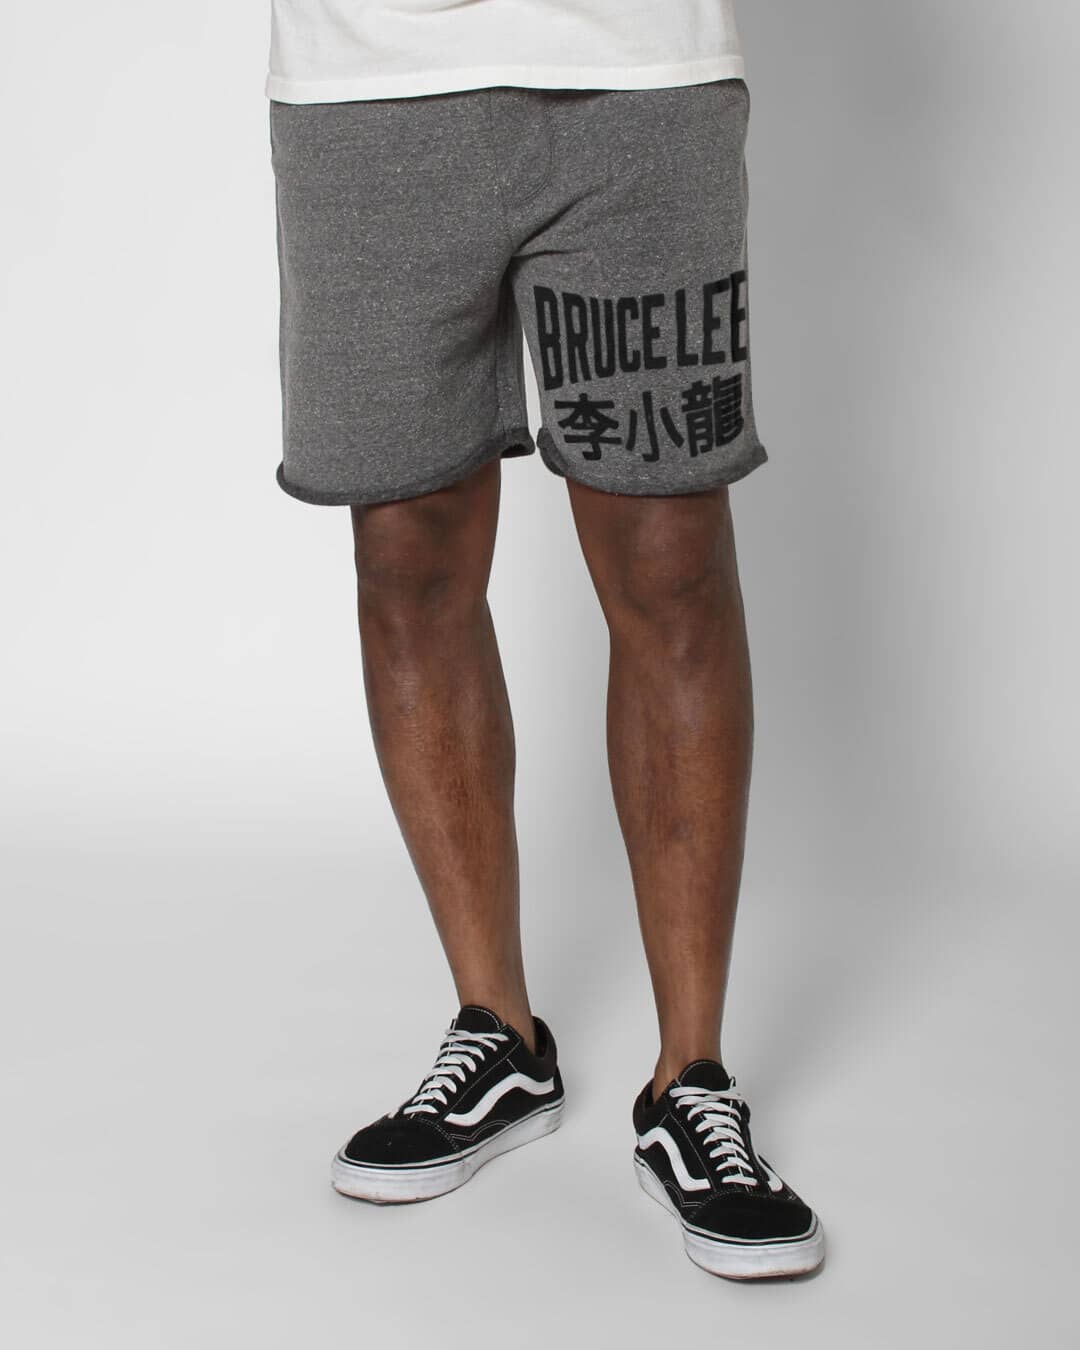 Bruce Lee Dragon Shorts - Roots of Inc dba Roots of Fight